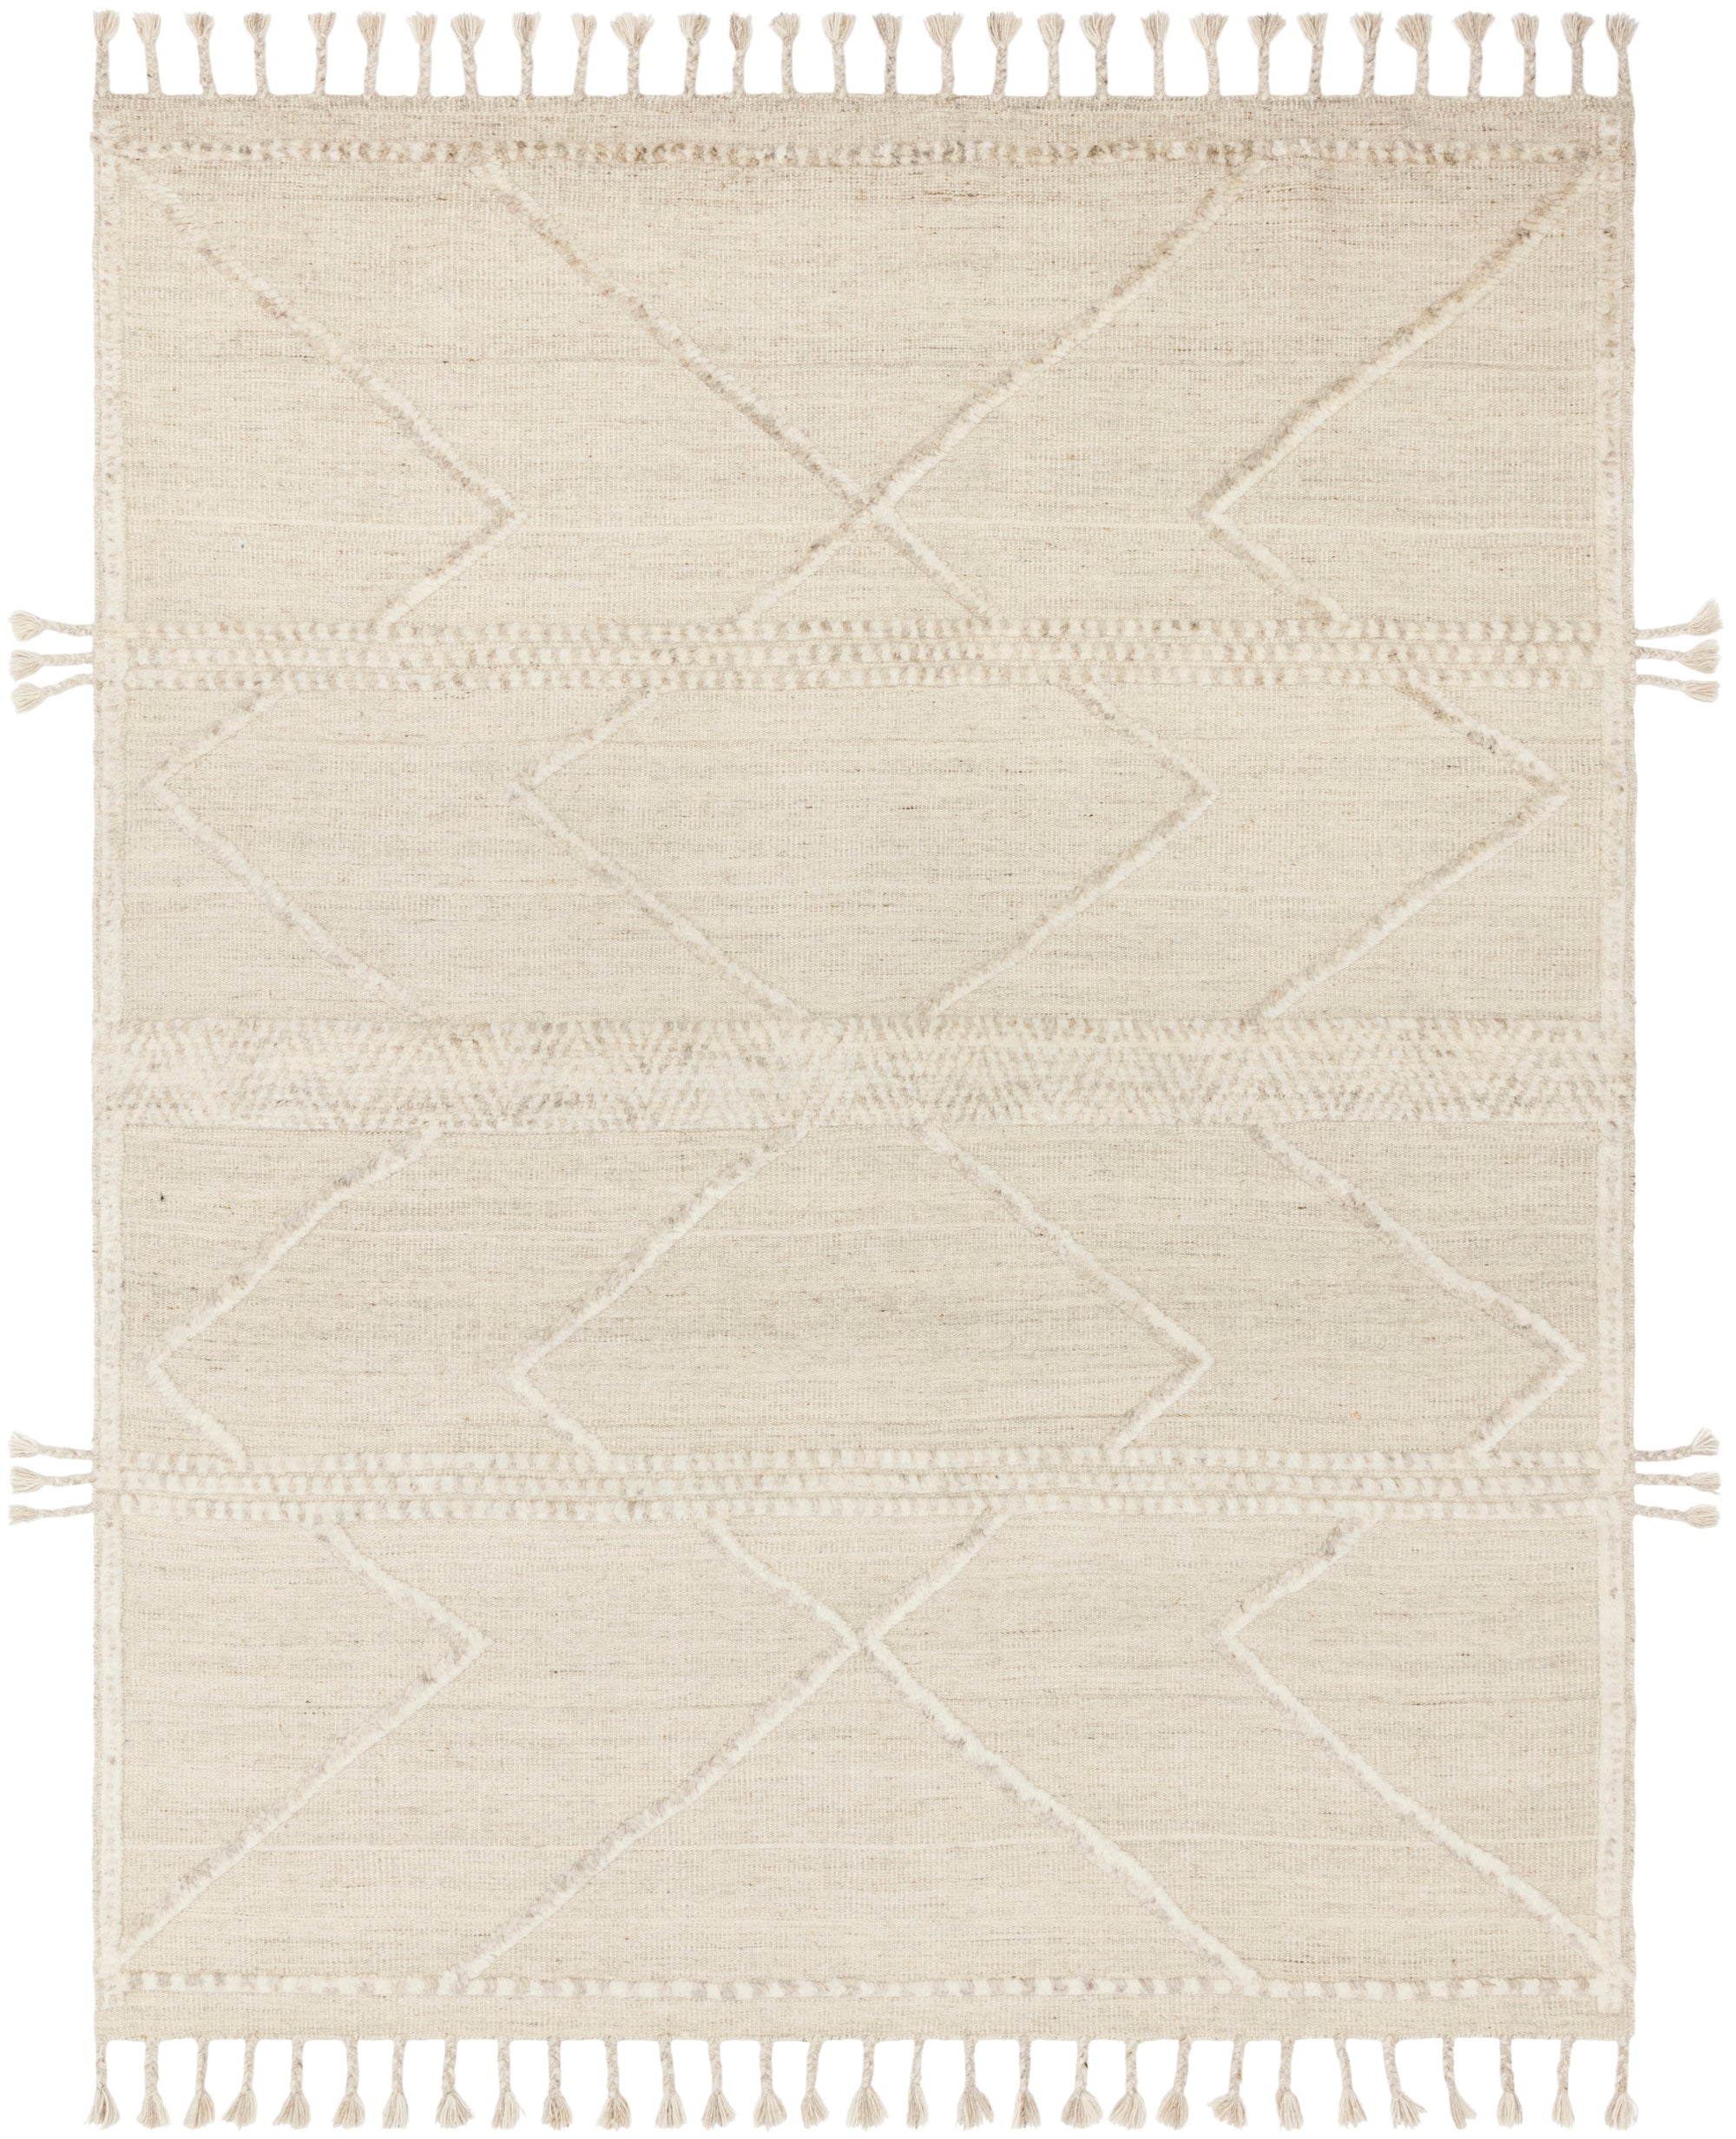 Iman Rug: Elevate Your Home with Artisanal Elegance